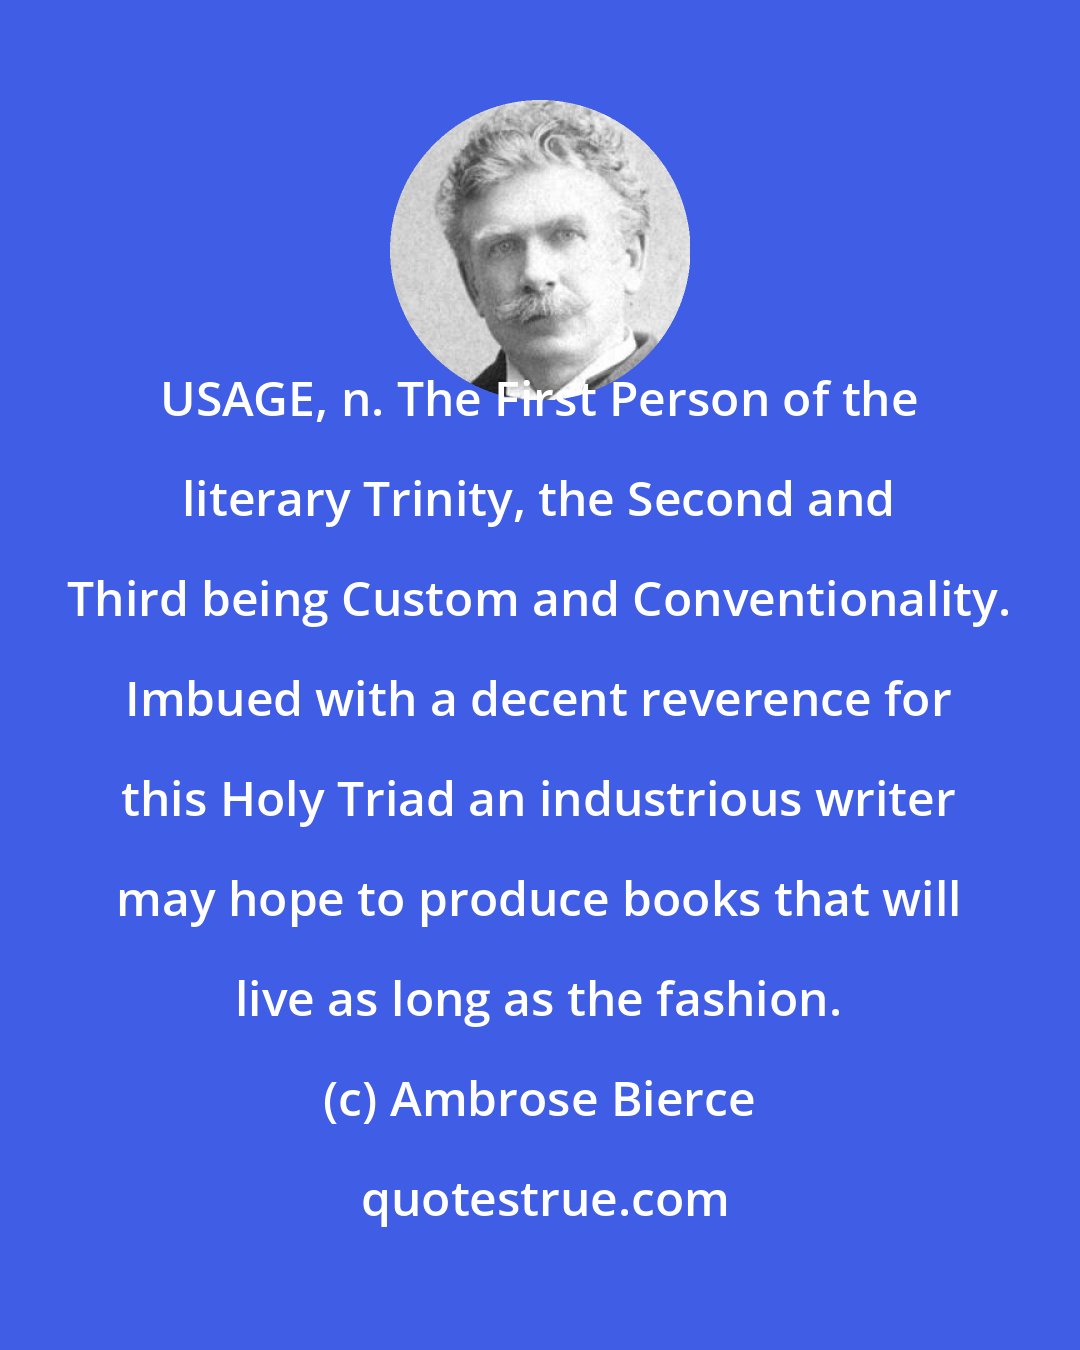 Ambrose Bierce: USAGE, n. The First Person of the literary Trinity, the Second and Third being Custom and Conventionality. Imbued with a decent reverence for this Holy Triad an industrious writer may hope to produce books that will live as long as the fashion.